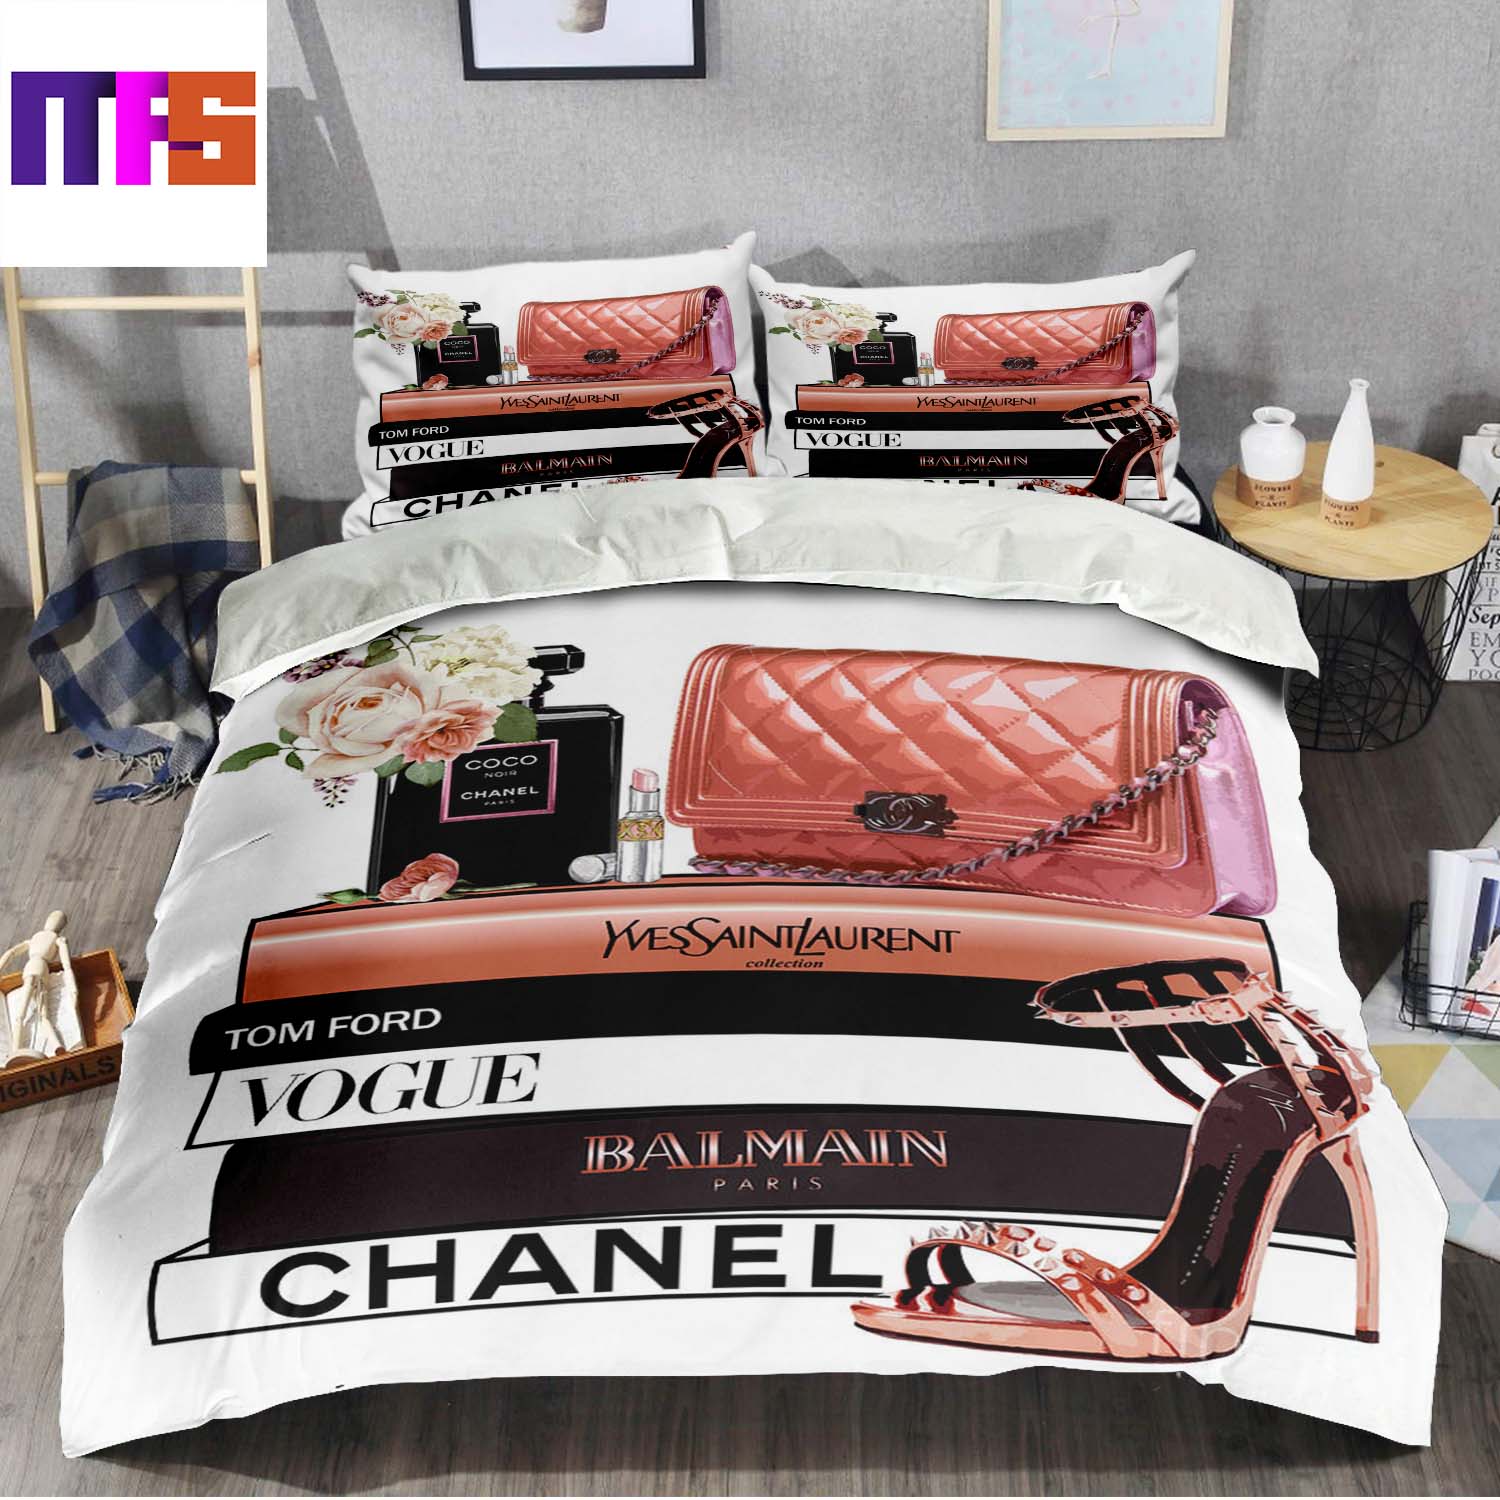 chanel bedding sets queen